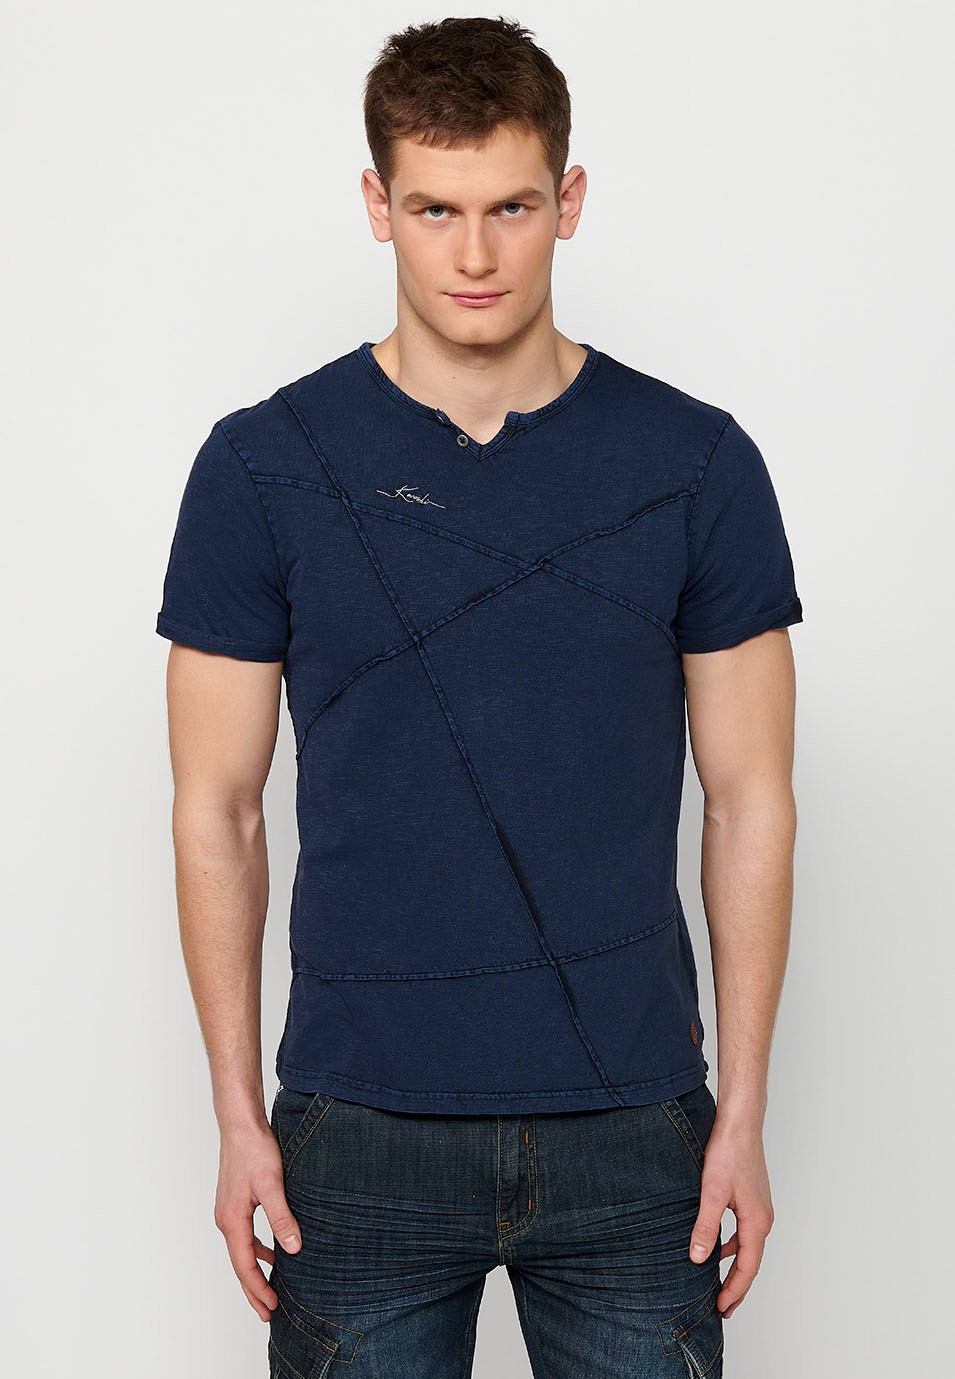 Short sleeve t-shirt, round neck with opening, blue color for men